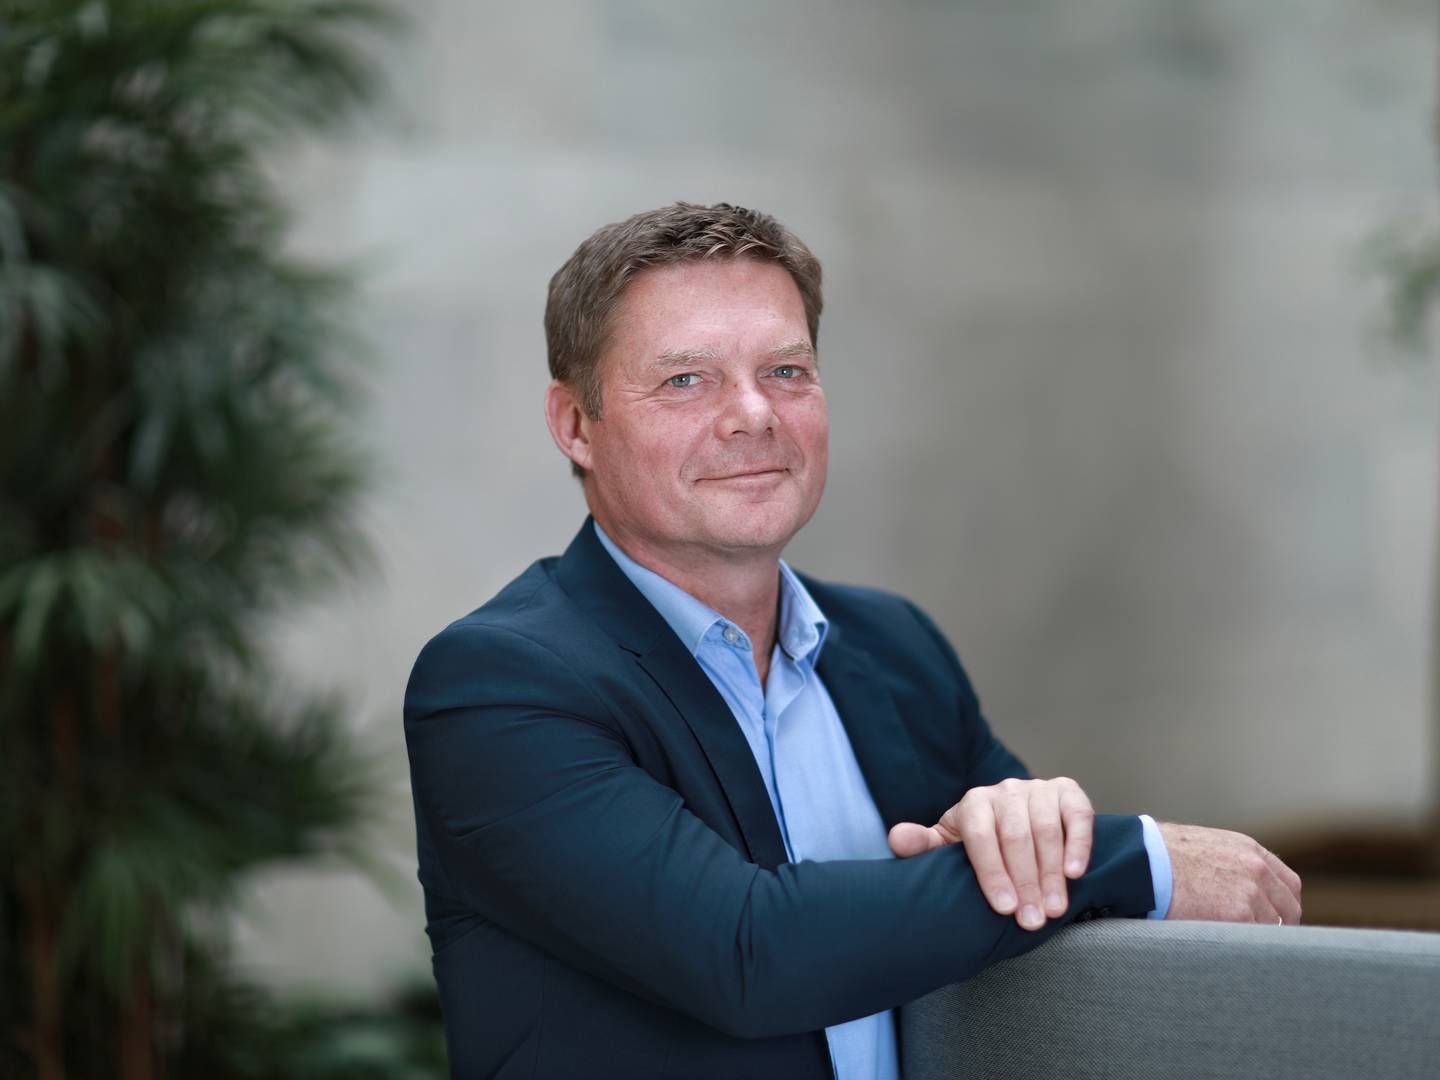 Morten Gregersen is chief portfolio manager at Formuepleje where he and his team manage the new fund Formuepleje Global Future. | Photo: PR / Formuepleje